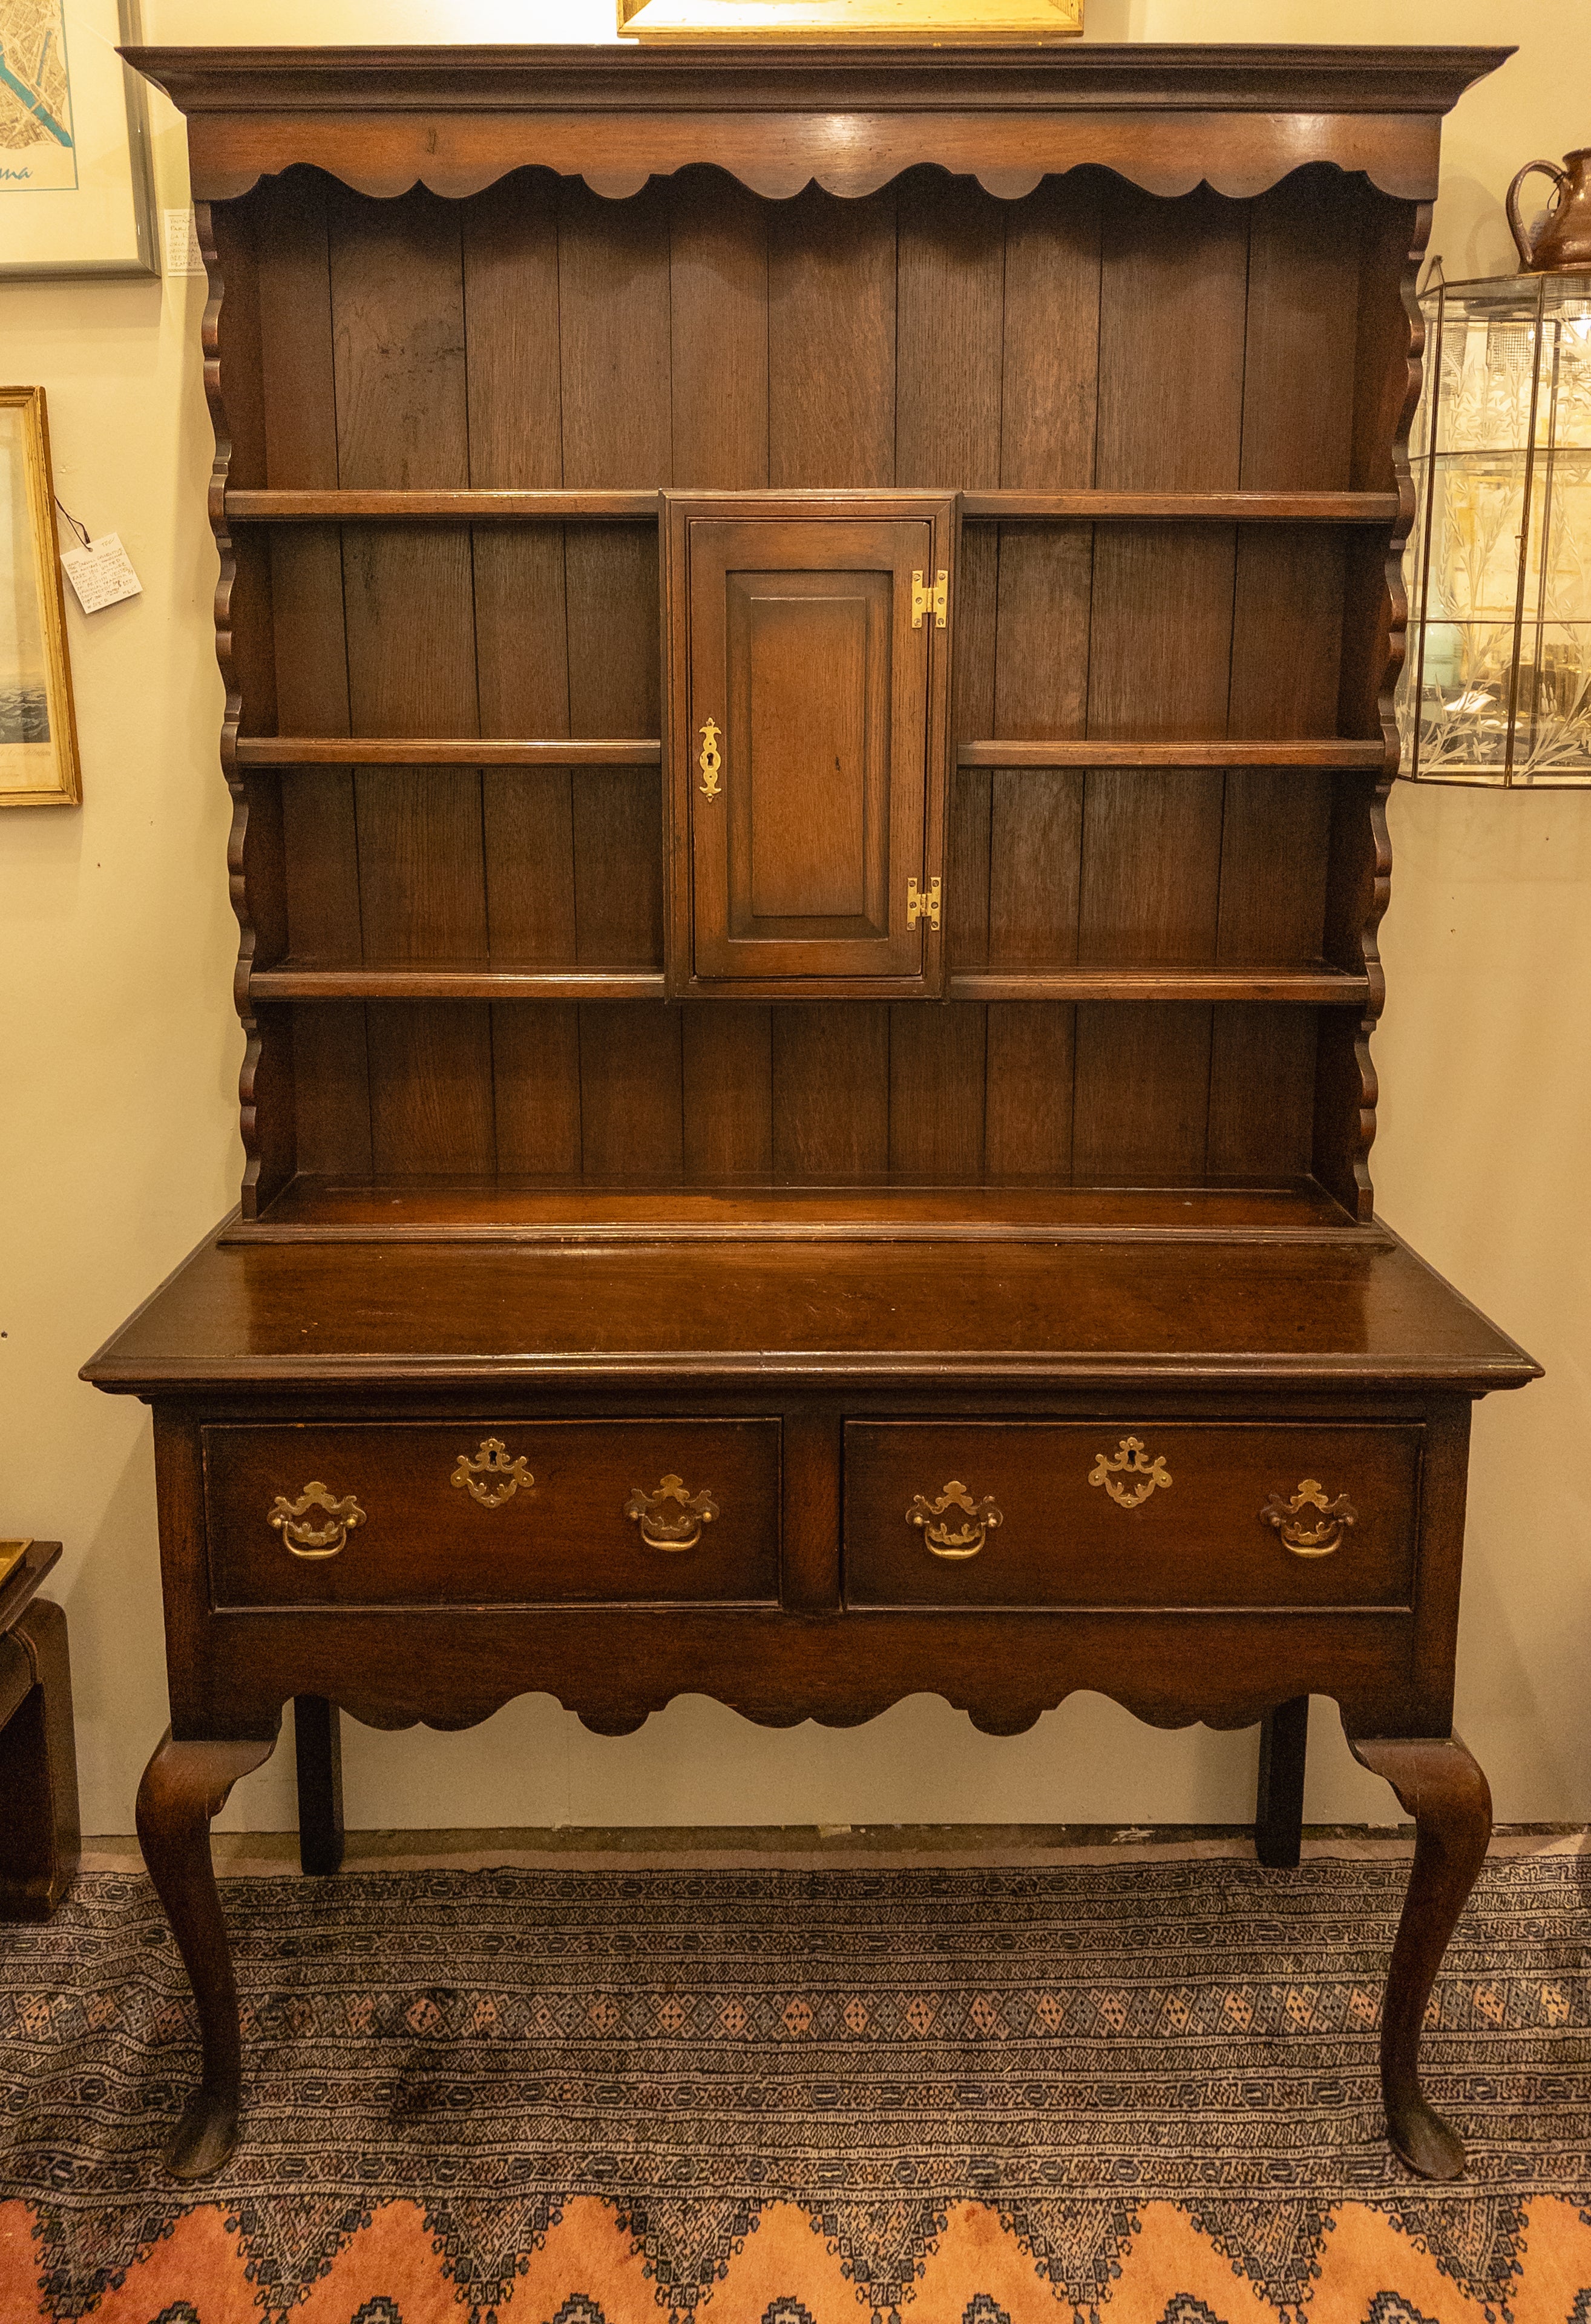 The late 19th-century Welsh Cupboard, fashioned from British Oak, is a captivating embodiment of historical craftsmanship. Adorned with a striking and authentic patina, it exudes a timeless allure that reflects the passage of time. The piece is